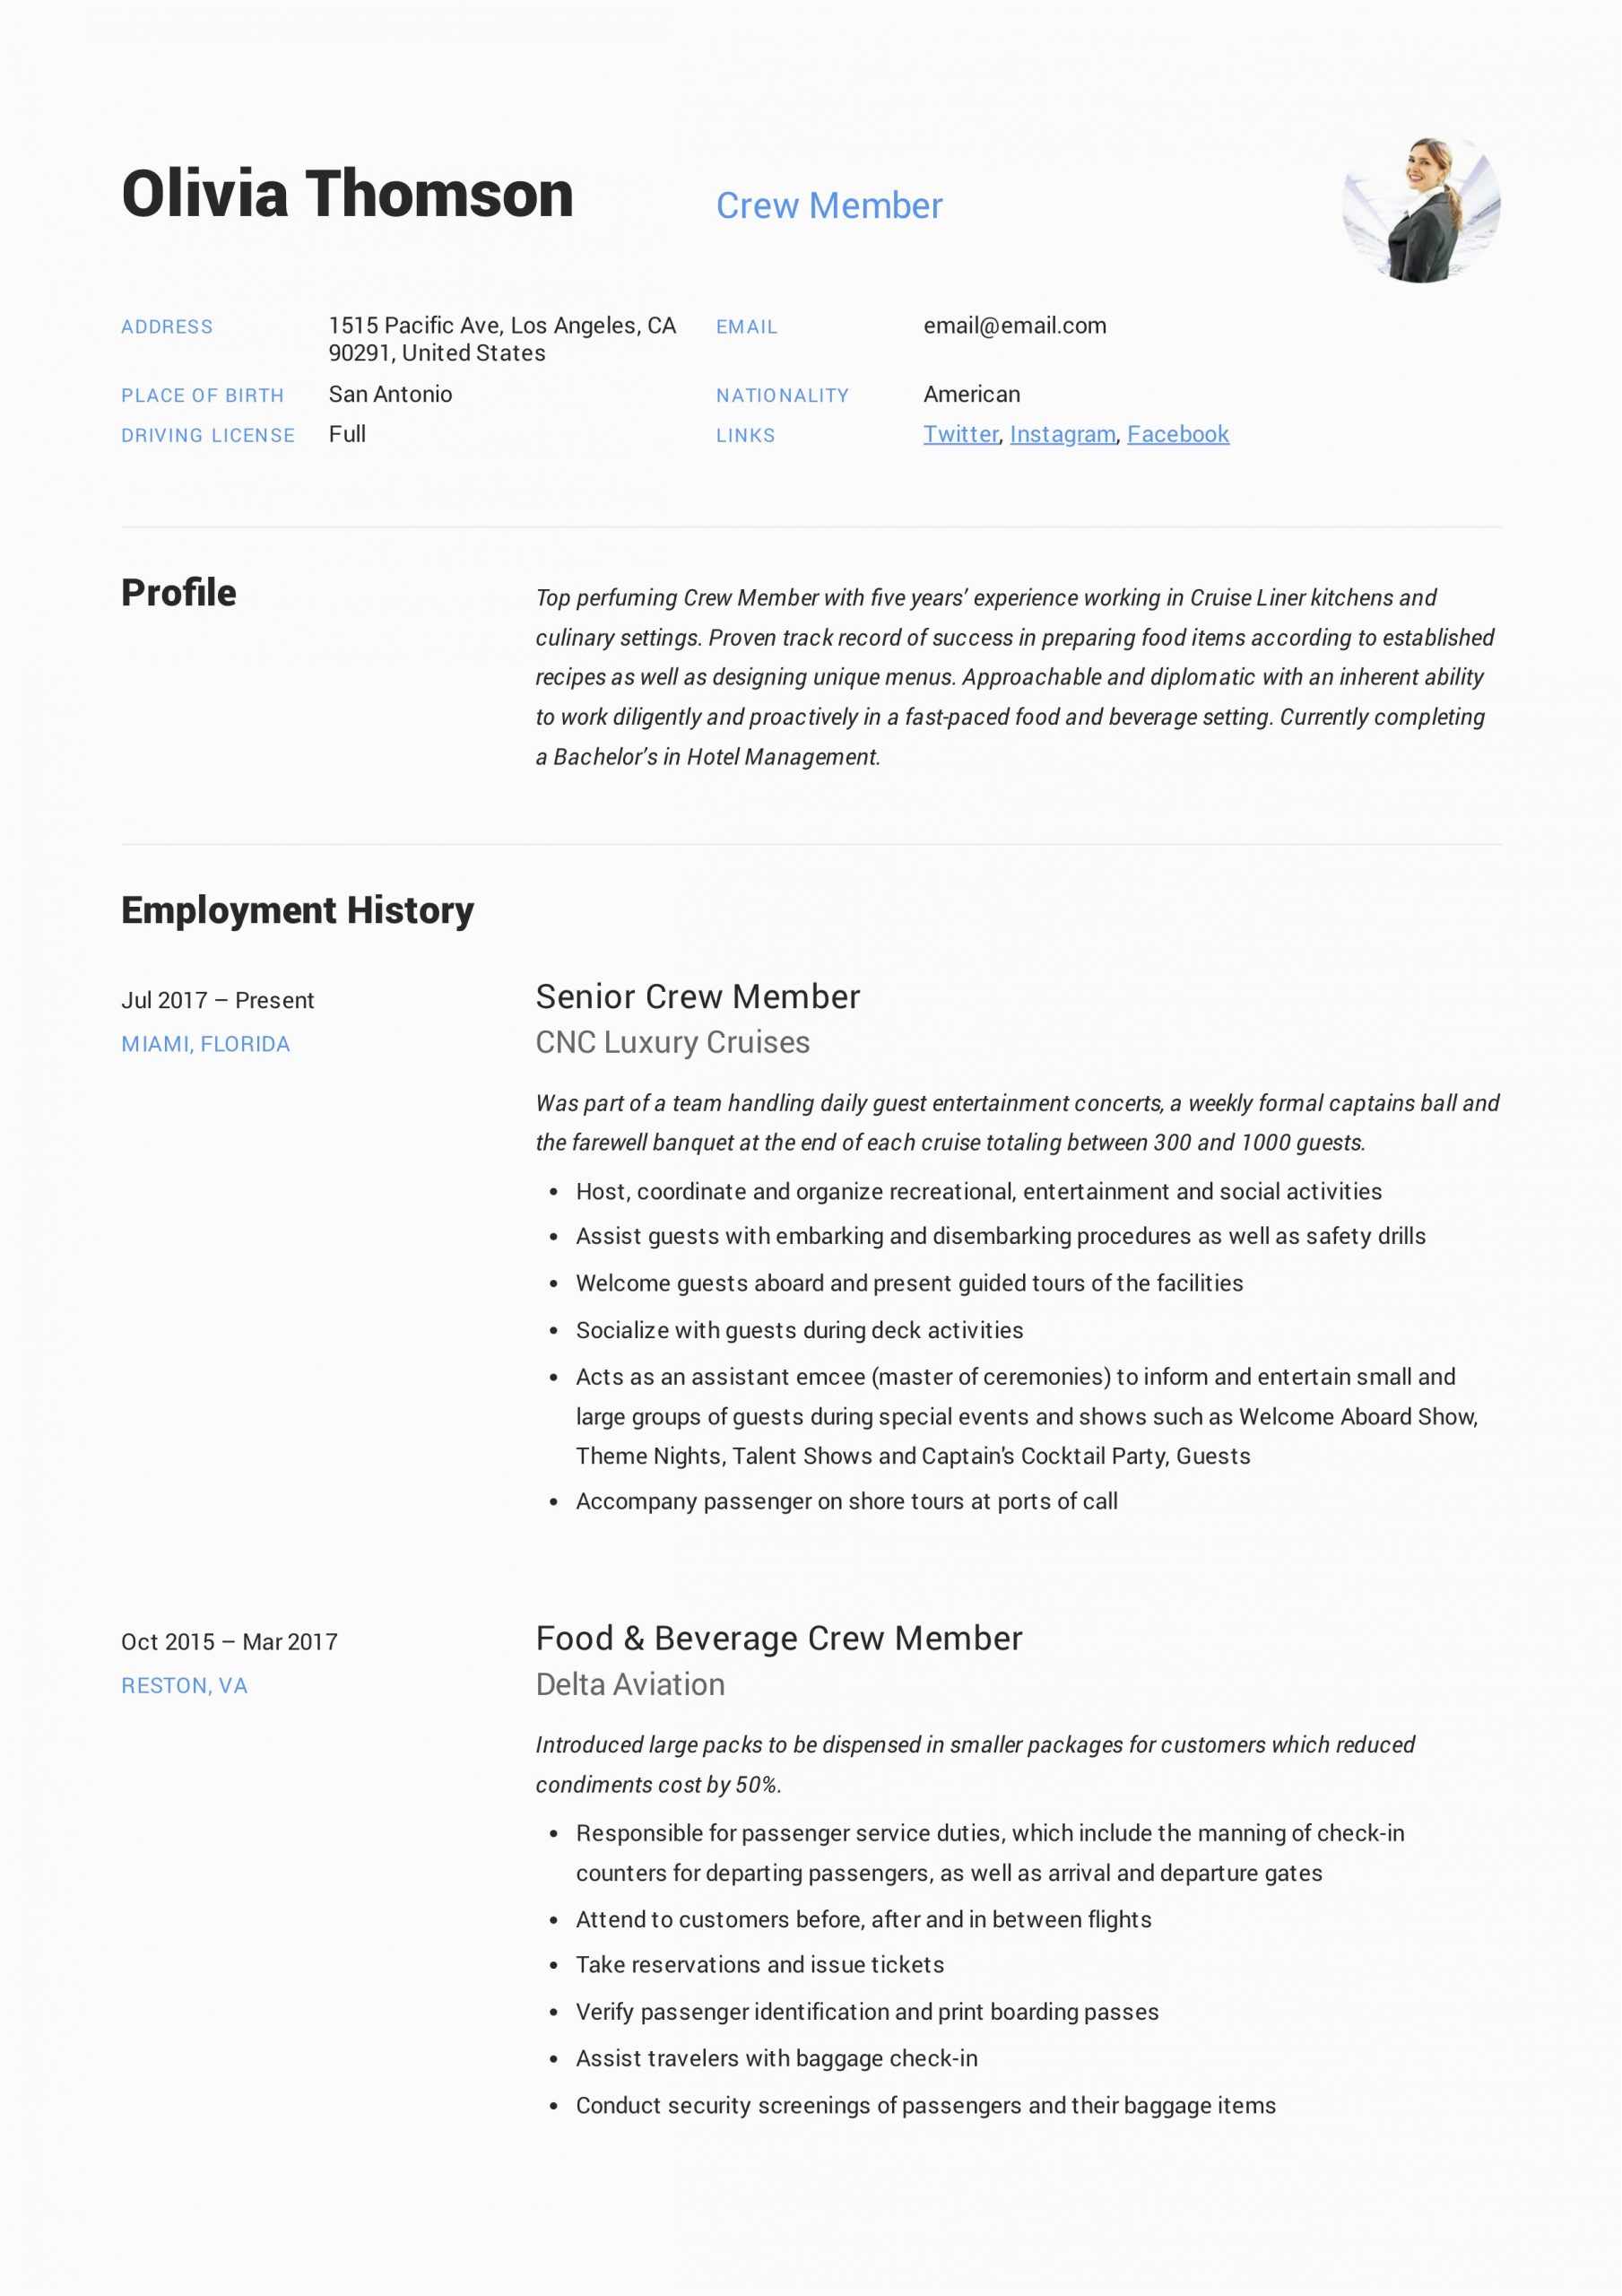 Sample Resume for Fast Food Crew without Experience Philippines Crew Member Resume & Writing Guide